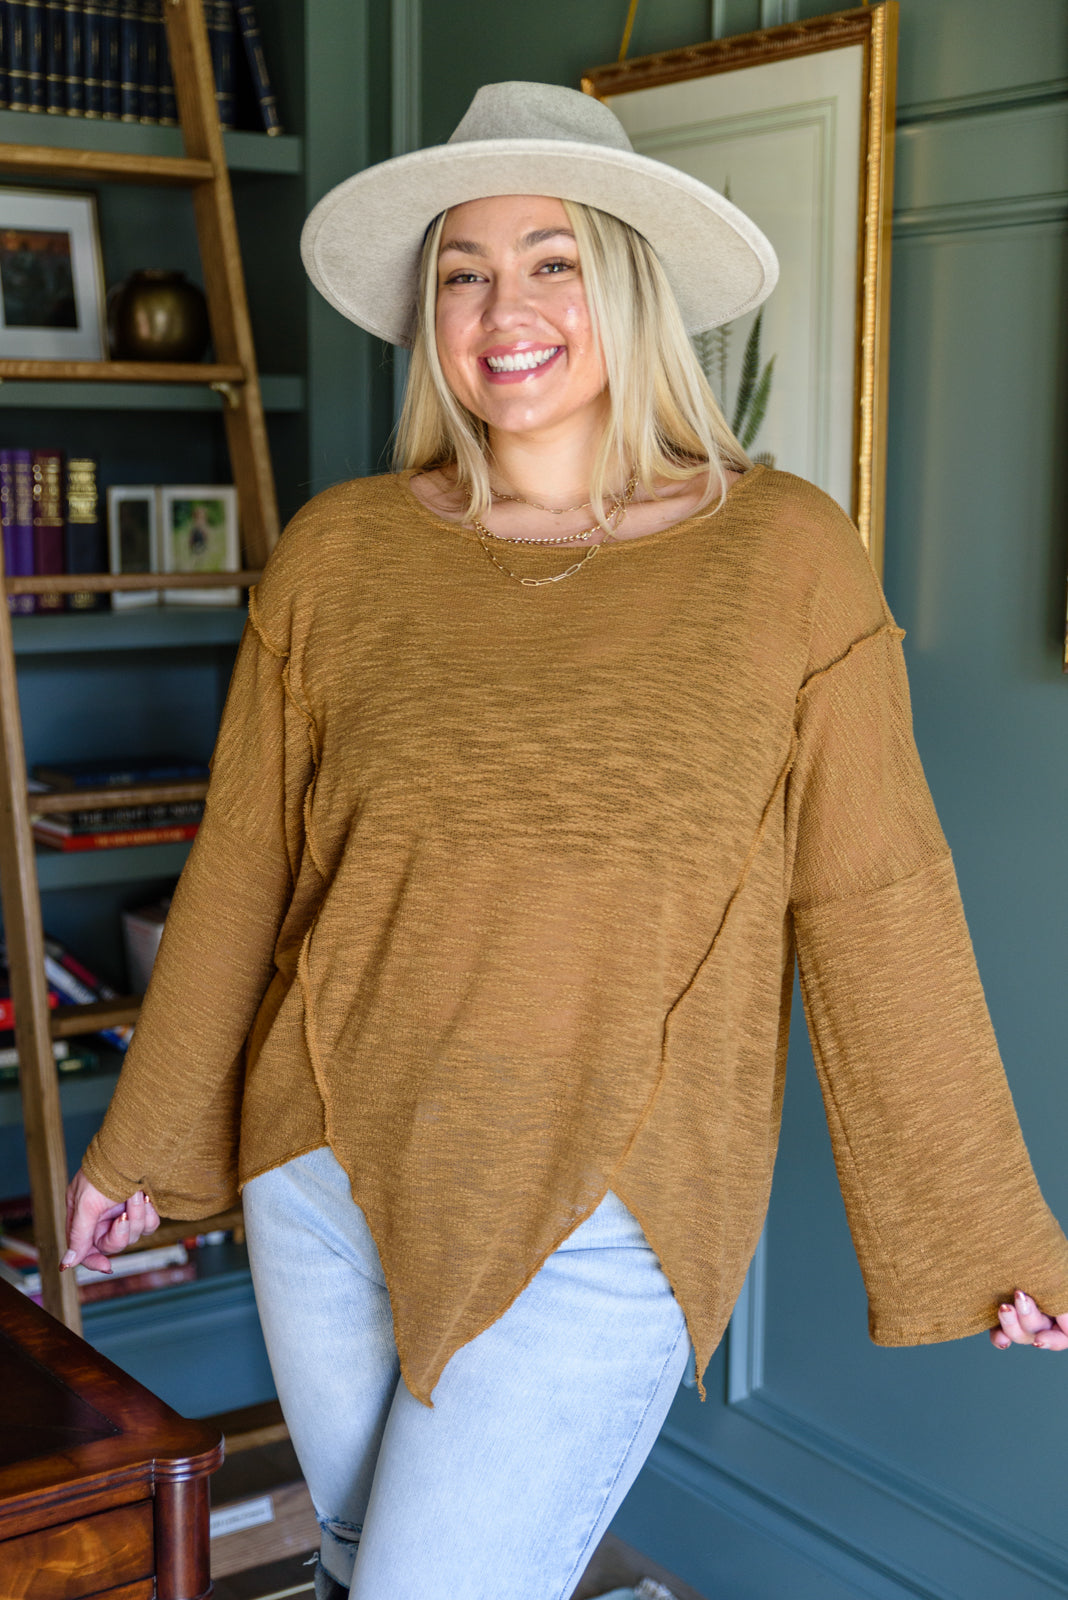 Maximize My Style Lightweight Sweater-Sweaters/Sweatshirts-Inspired by Justeen-Women's Clothing Boutique in Chicago, Illinois